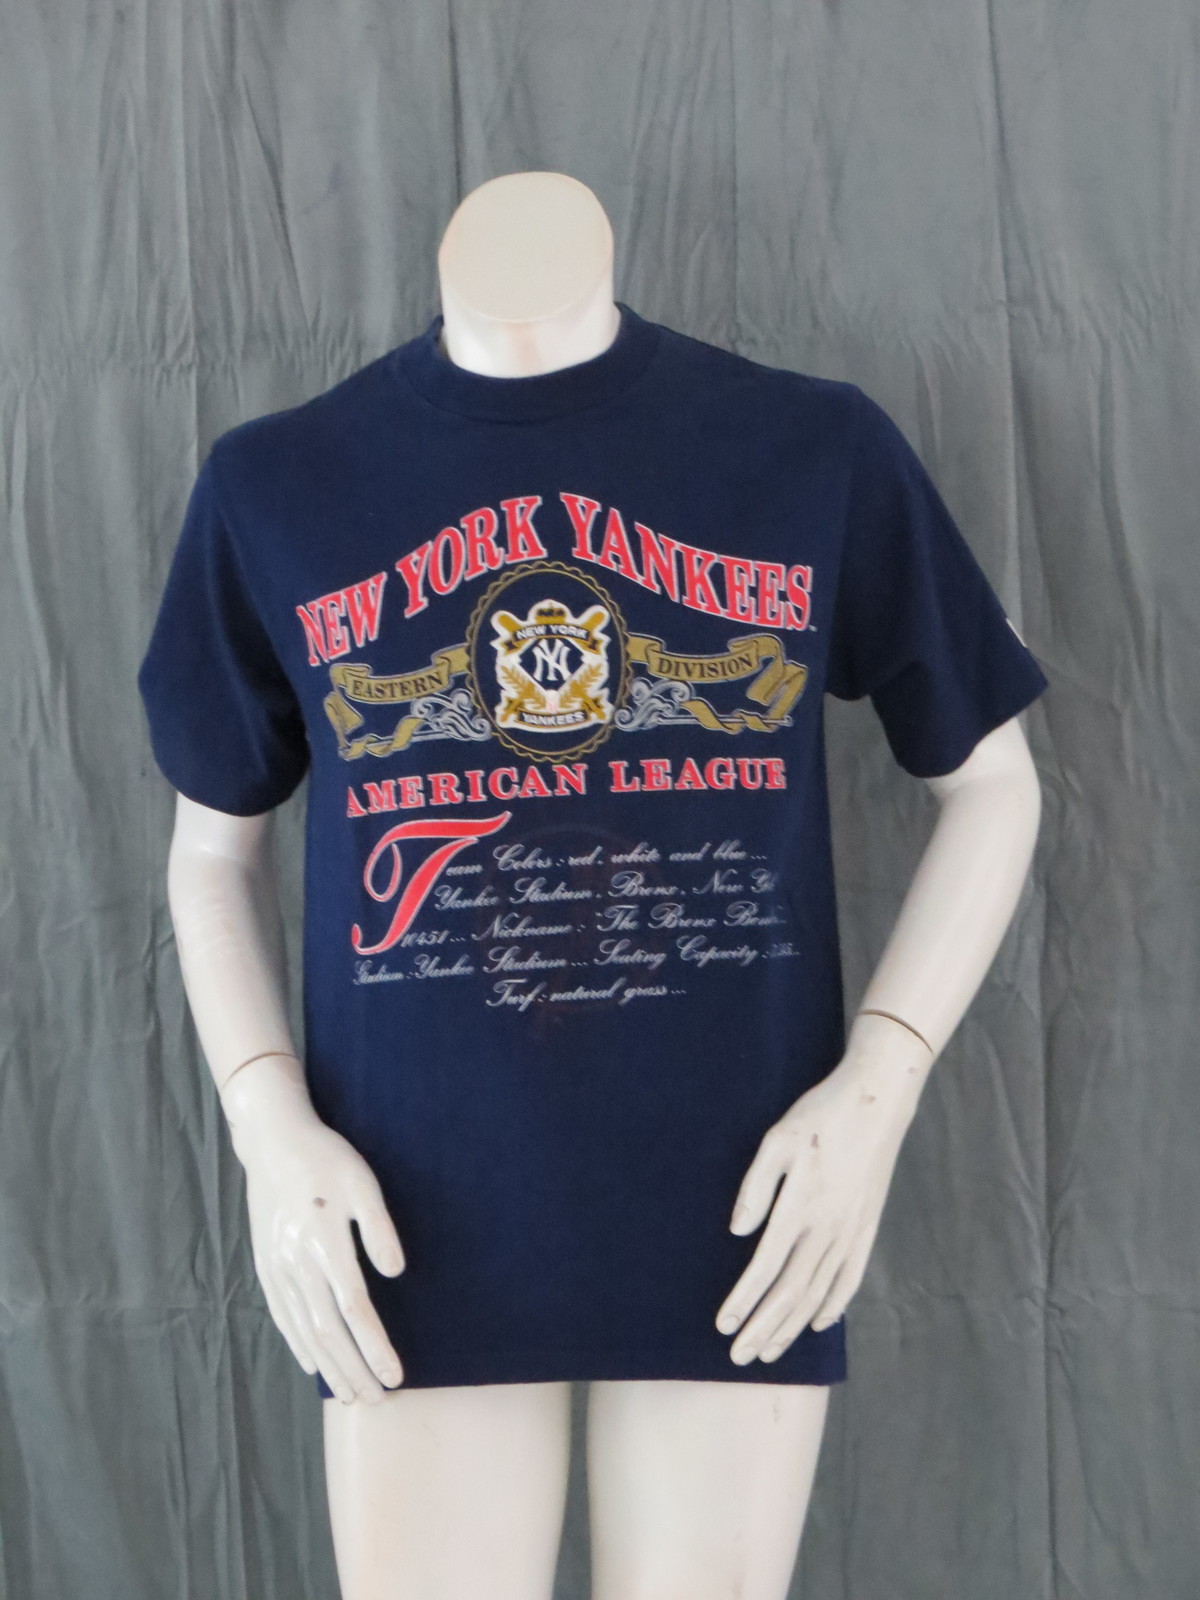 New York Yankees Shirt (VTG) - By Nutmeg Mills - Featuring Patch - Men's Large - $49.00